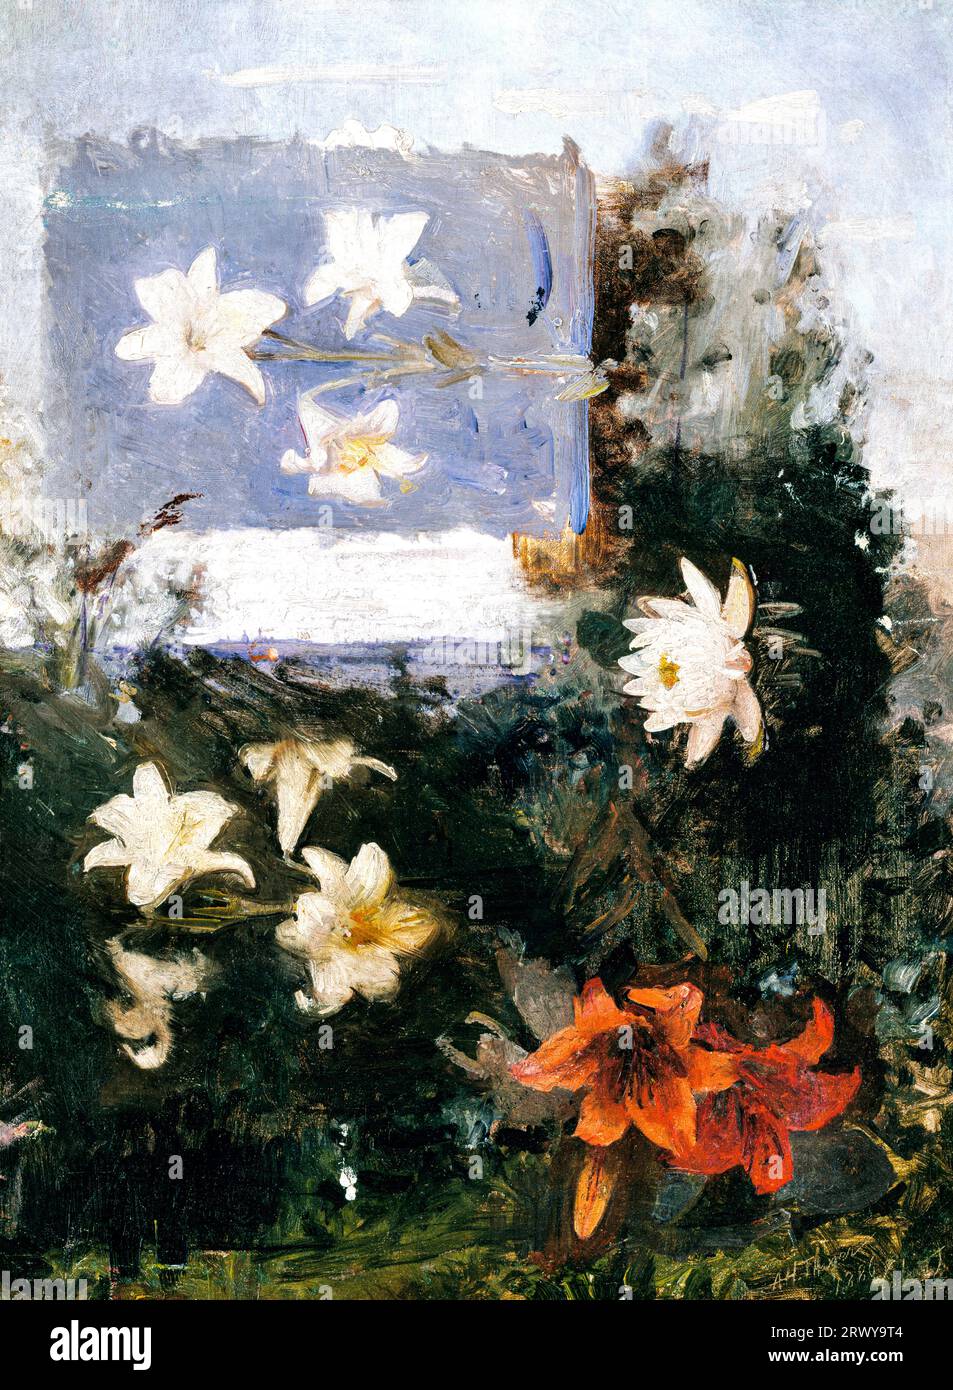 Flower Studies  painting in high resolution by Abbott Handerson Thayer. Original from the Smithsonian Institution. Stock Photo